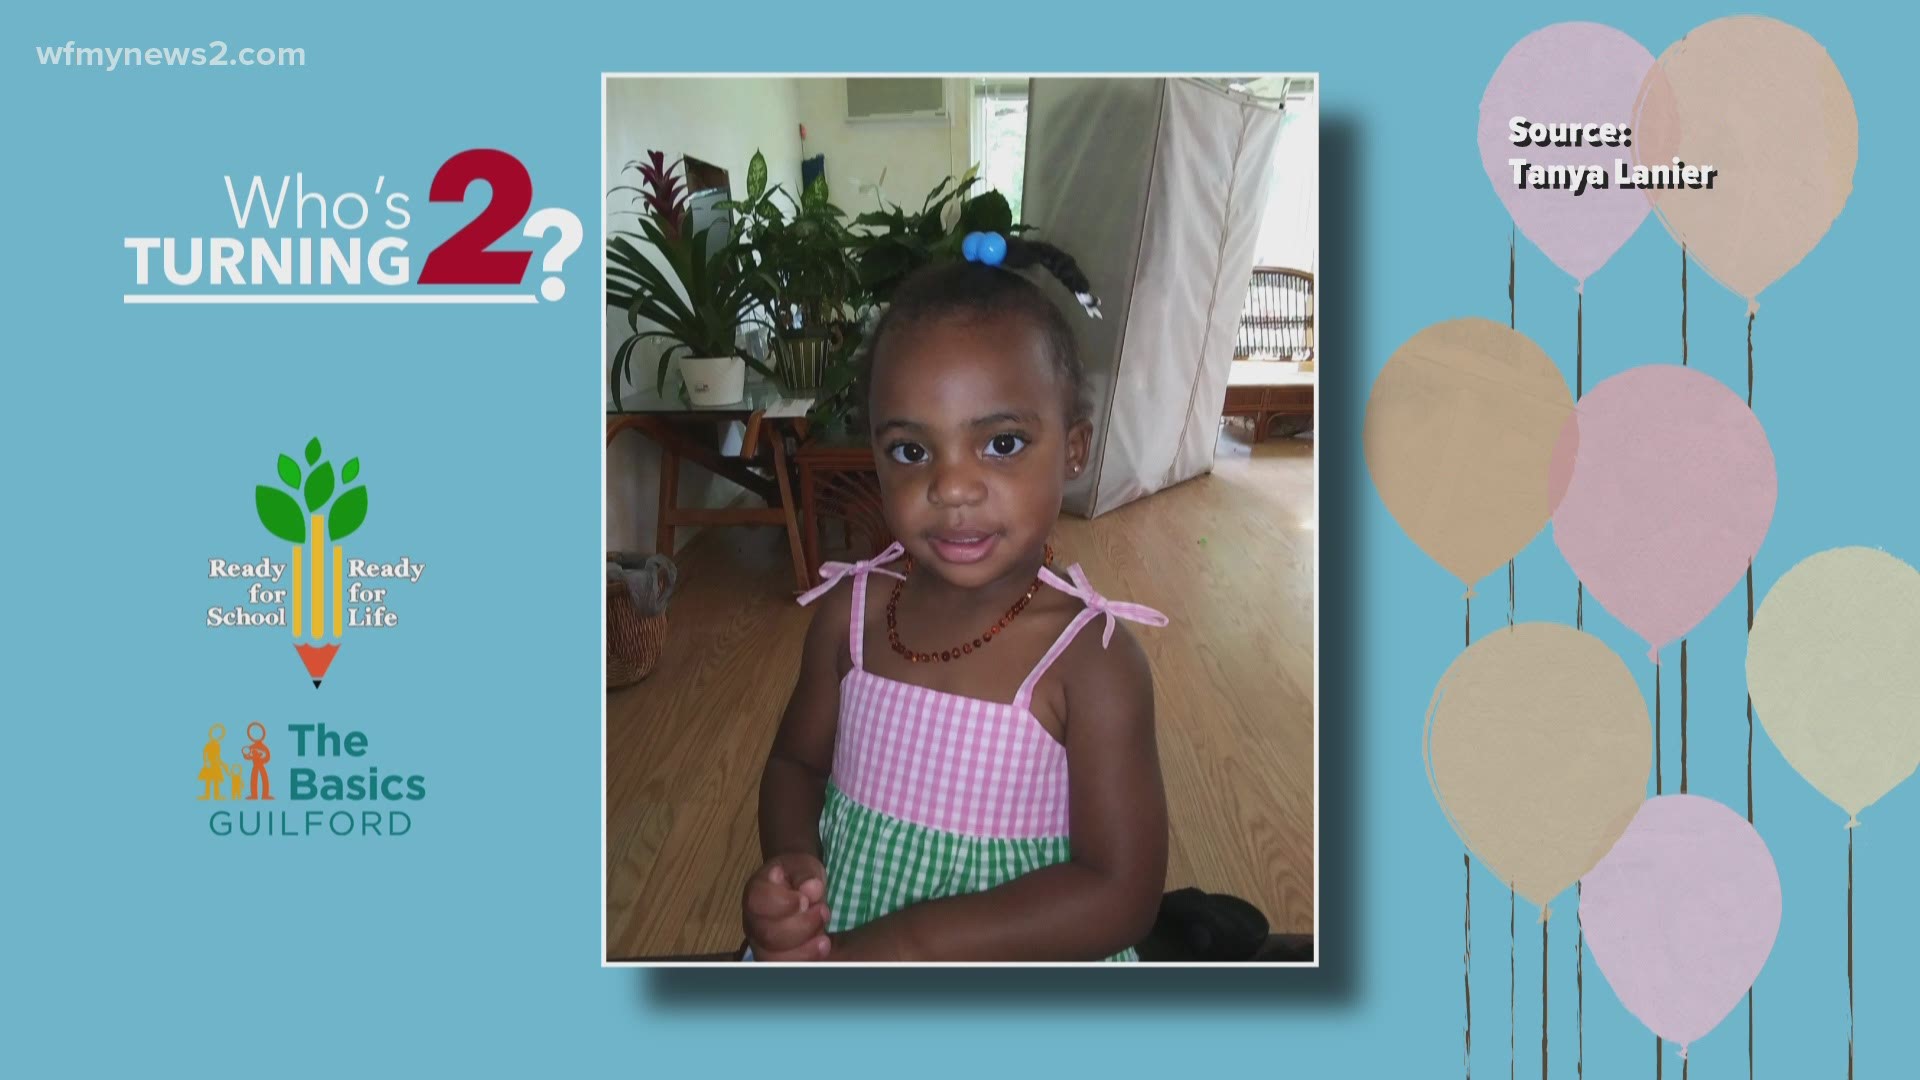 Each week we feature a few 2nd birthday shoutouts on the Good Morning Show.